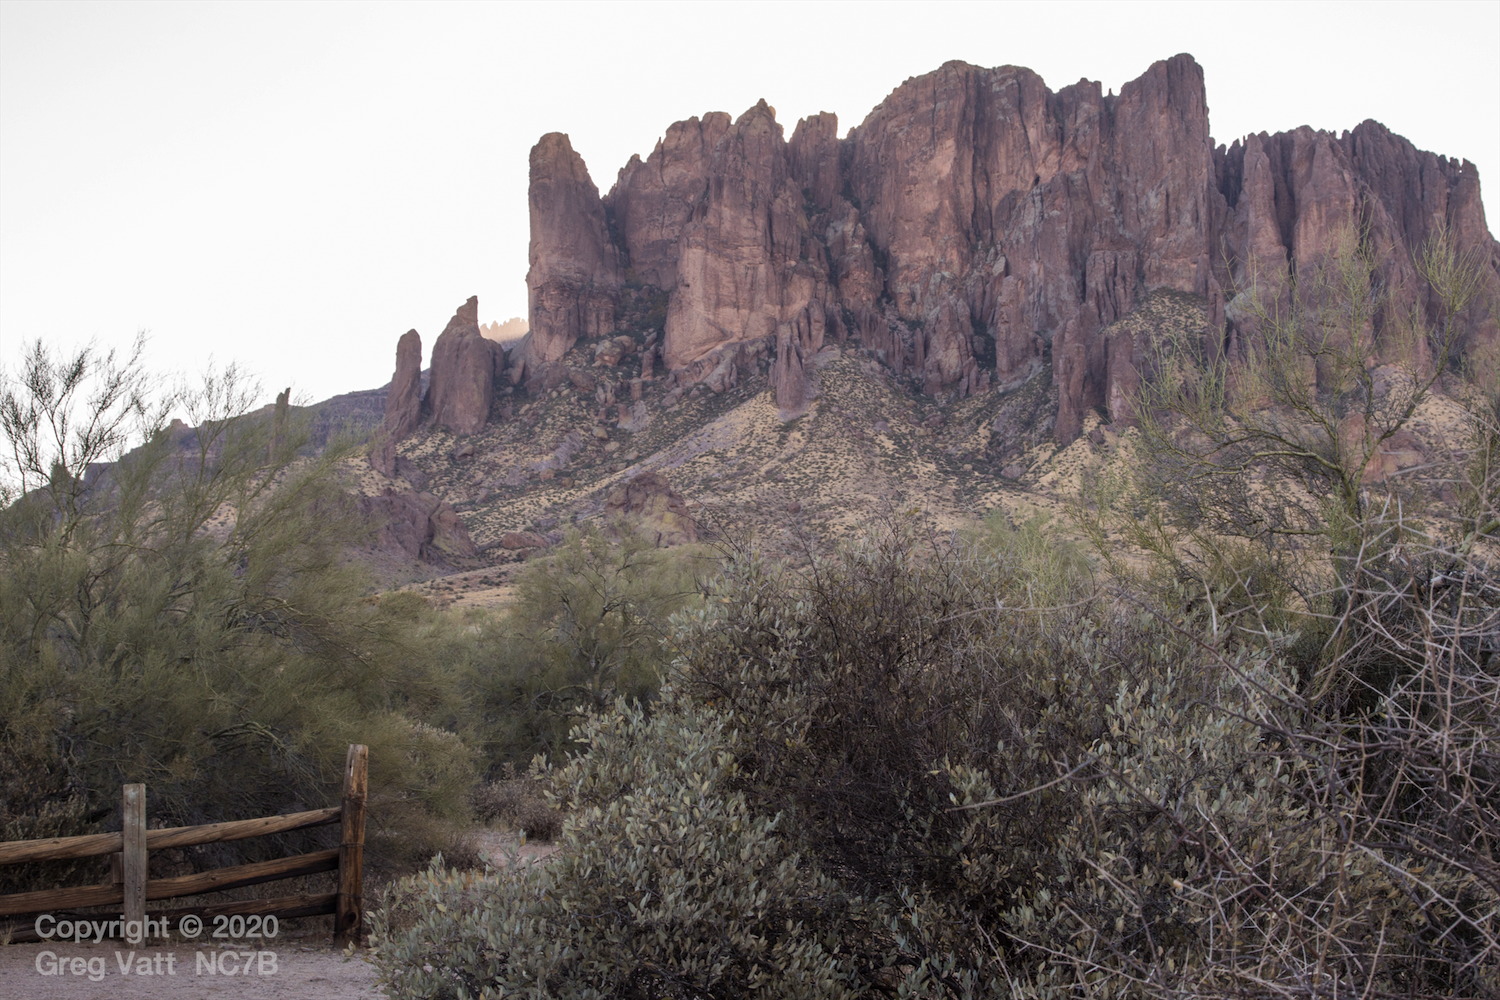 Looking toward the east, the morning sun is about to rise behind the Superstition Mountains.